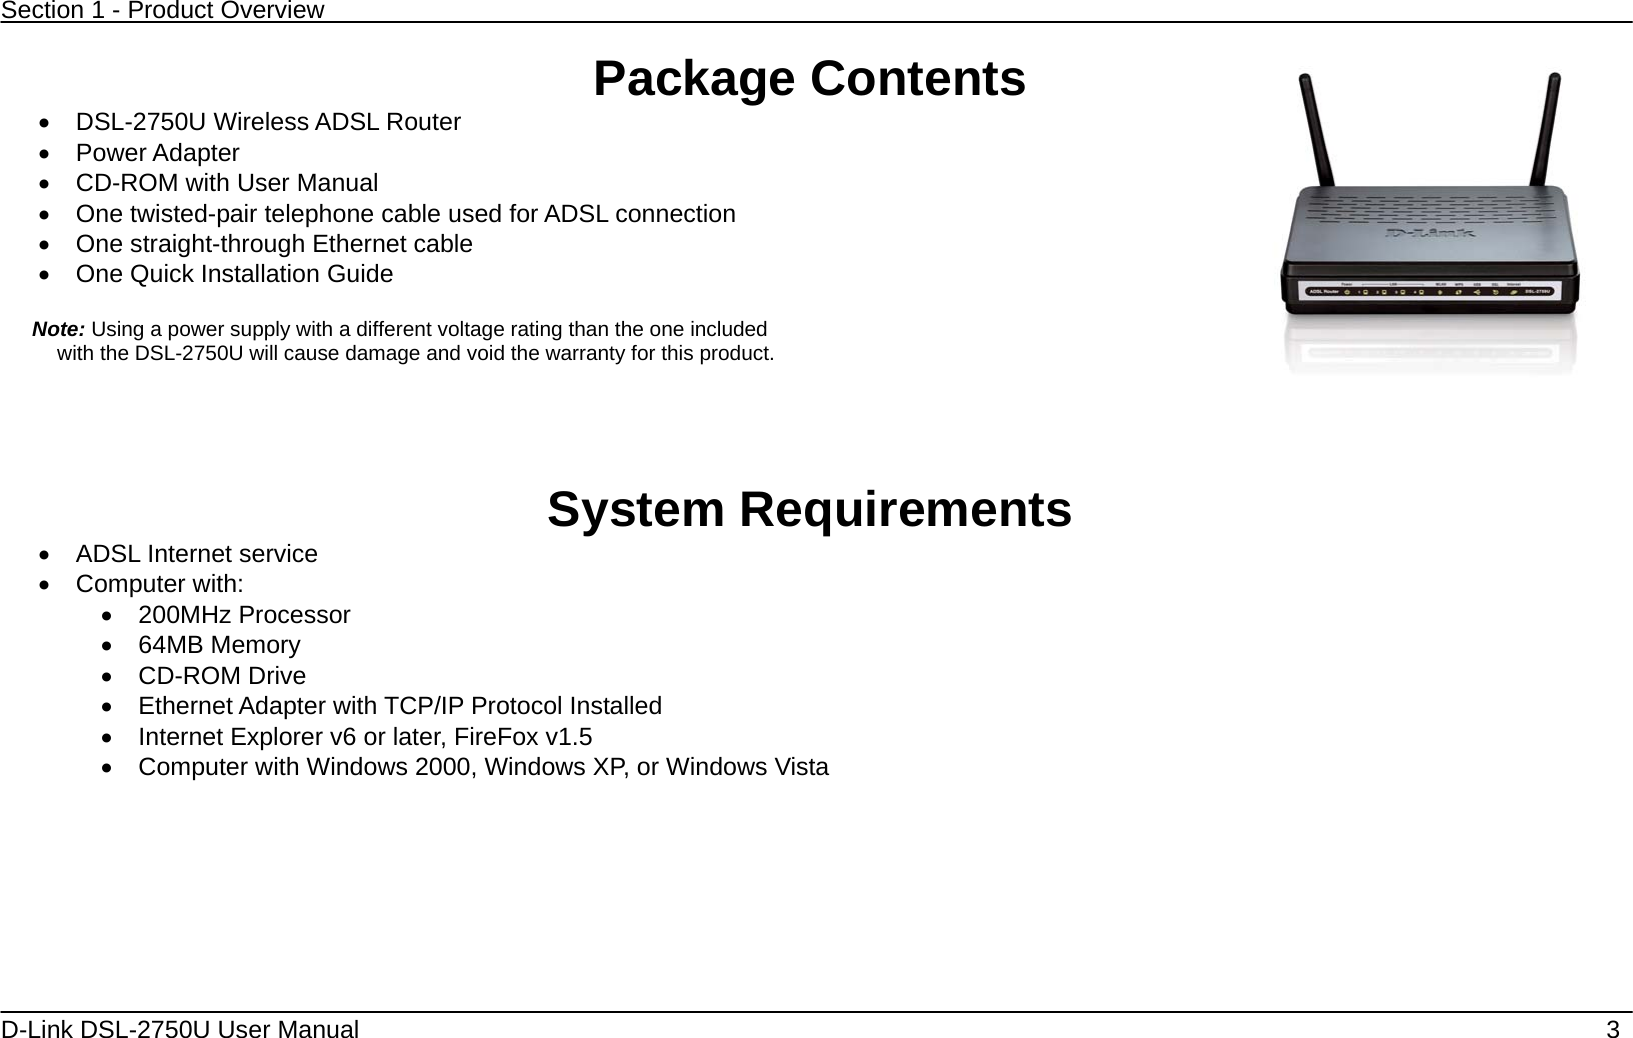 Section 1 - Product Overview  D-Link DSL-2750U User Manual    3 Package Contents   DSL-2750U Wireless ADSL Router  Power Adapter    CD-ROM with User Manual     One twisted-pair telephone cable used for ADSL connection    One straight-through Ethernet cable  One Quick Installation Guide   Note: Using a power supply with a different voltage rating than the one included with the DSL-2750U will cause damage and void the warranty for this product.     System Requirements   ADSL Internet service  Computer with:  200MHz Processor  64MB Memory  CD-ROM Drive   Ethernet Adapter with TCP/IP Protocol Installed   Internet Explorer v6 or later, FireFox v1.5   Computer with Windows 2000, Windows XP, or Windows Vista  